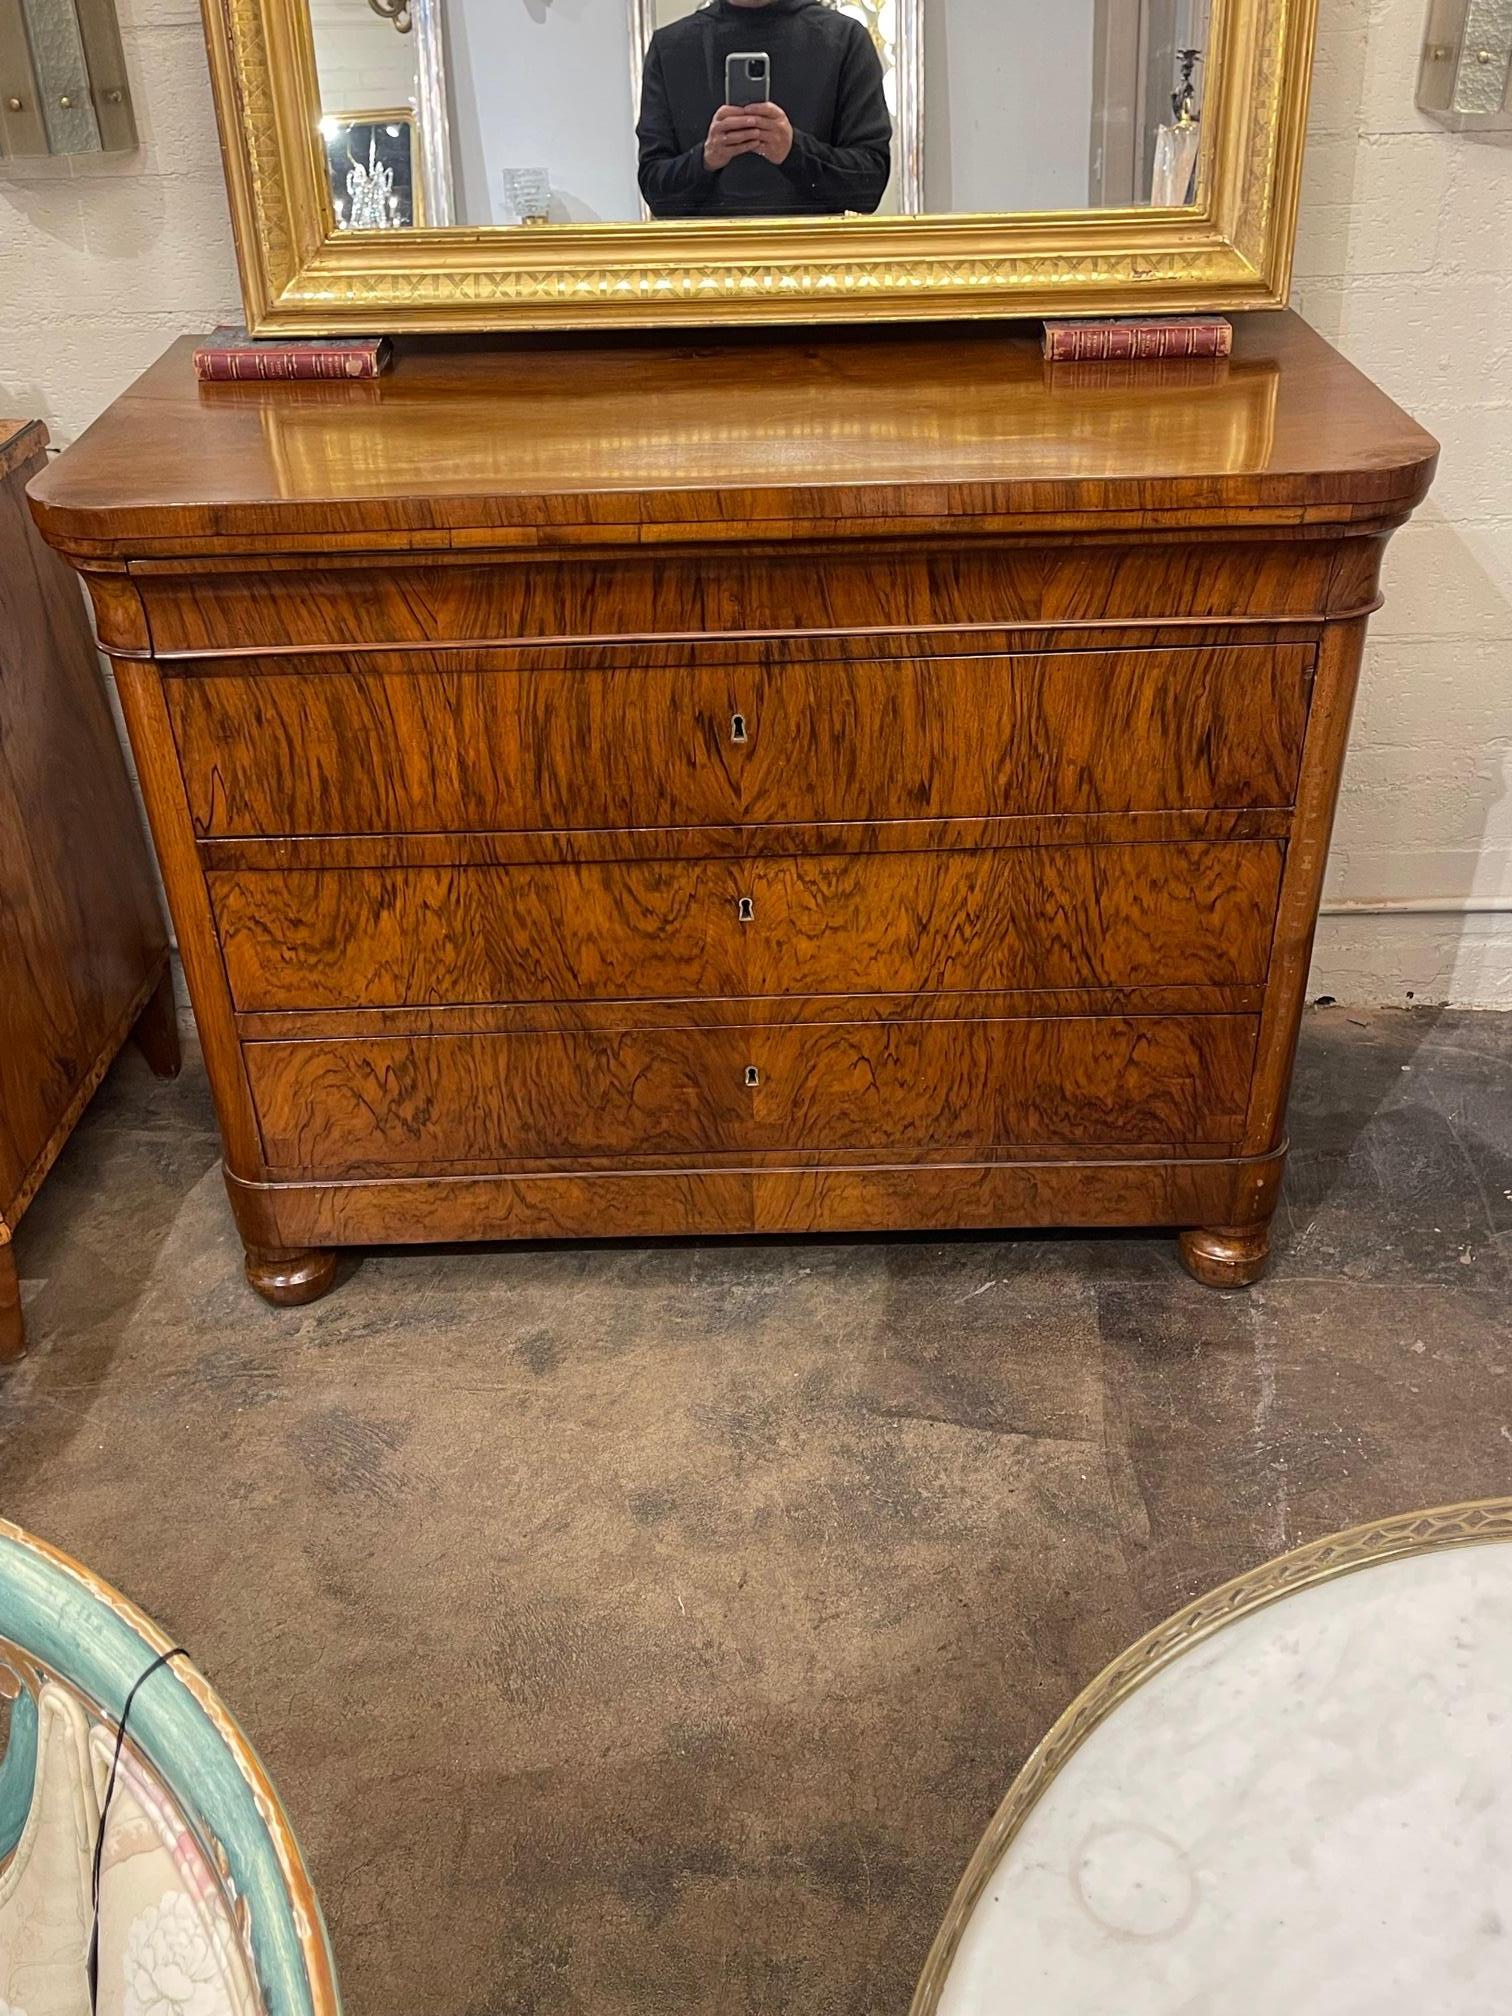 Handsome 19th century French Charles X black walnut commode, Circa 1850. This is a handsome piece with beautiful wood grain and polish.